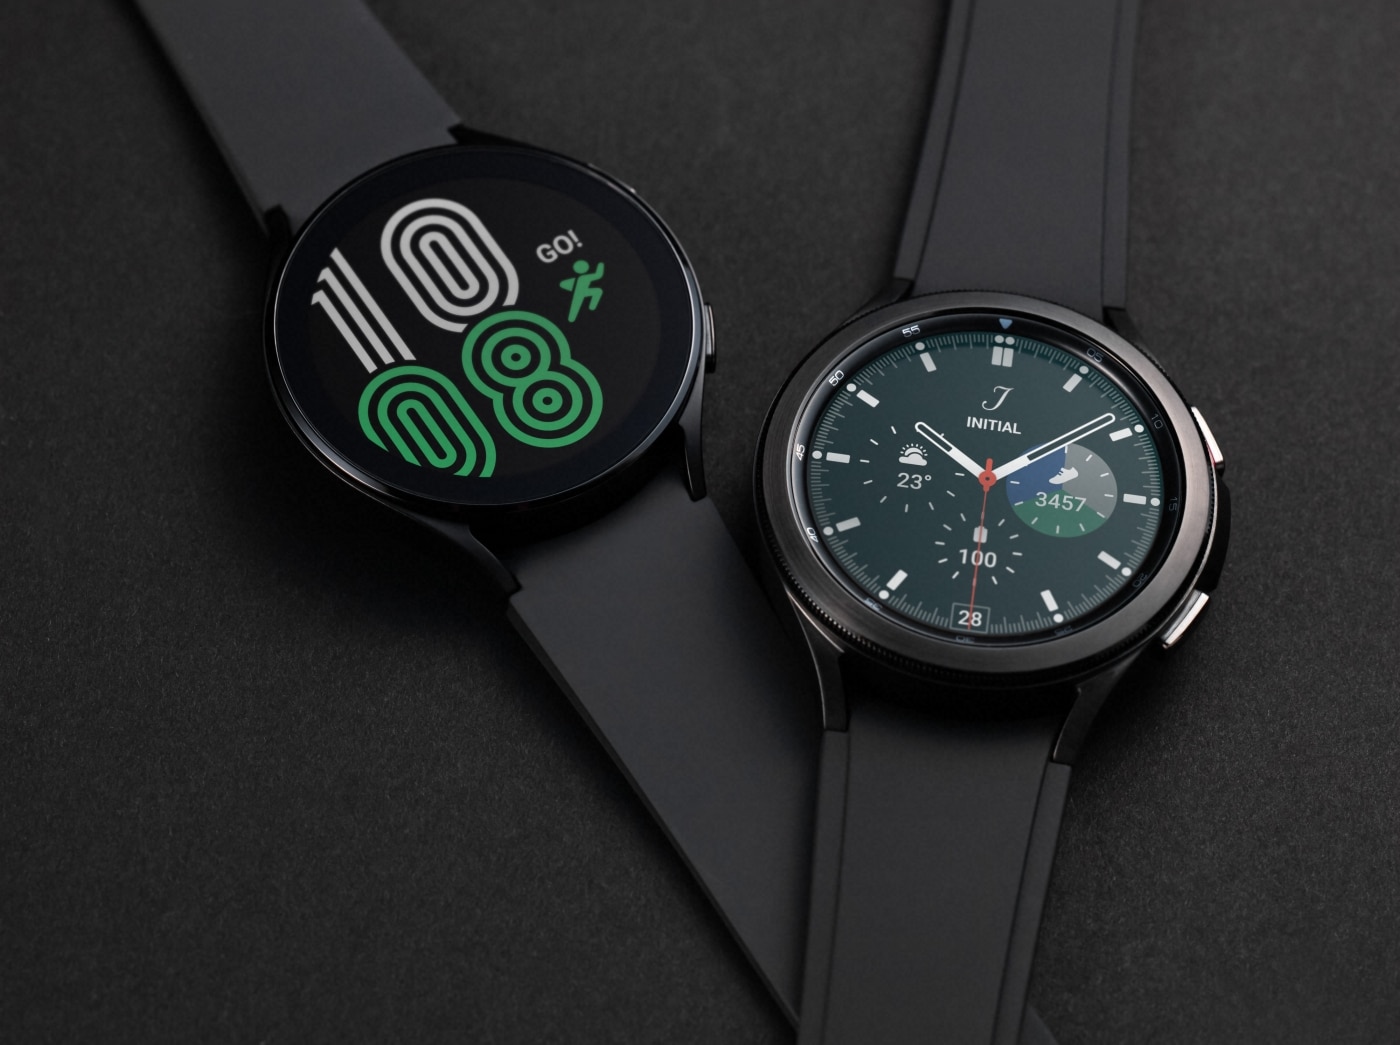 WearOS will adapt the screen to the way you wear your smartwatch